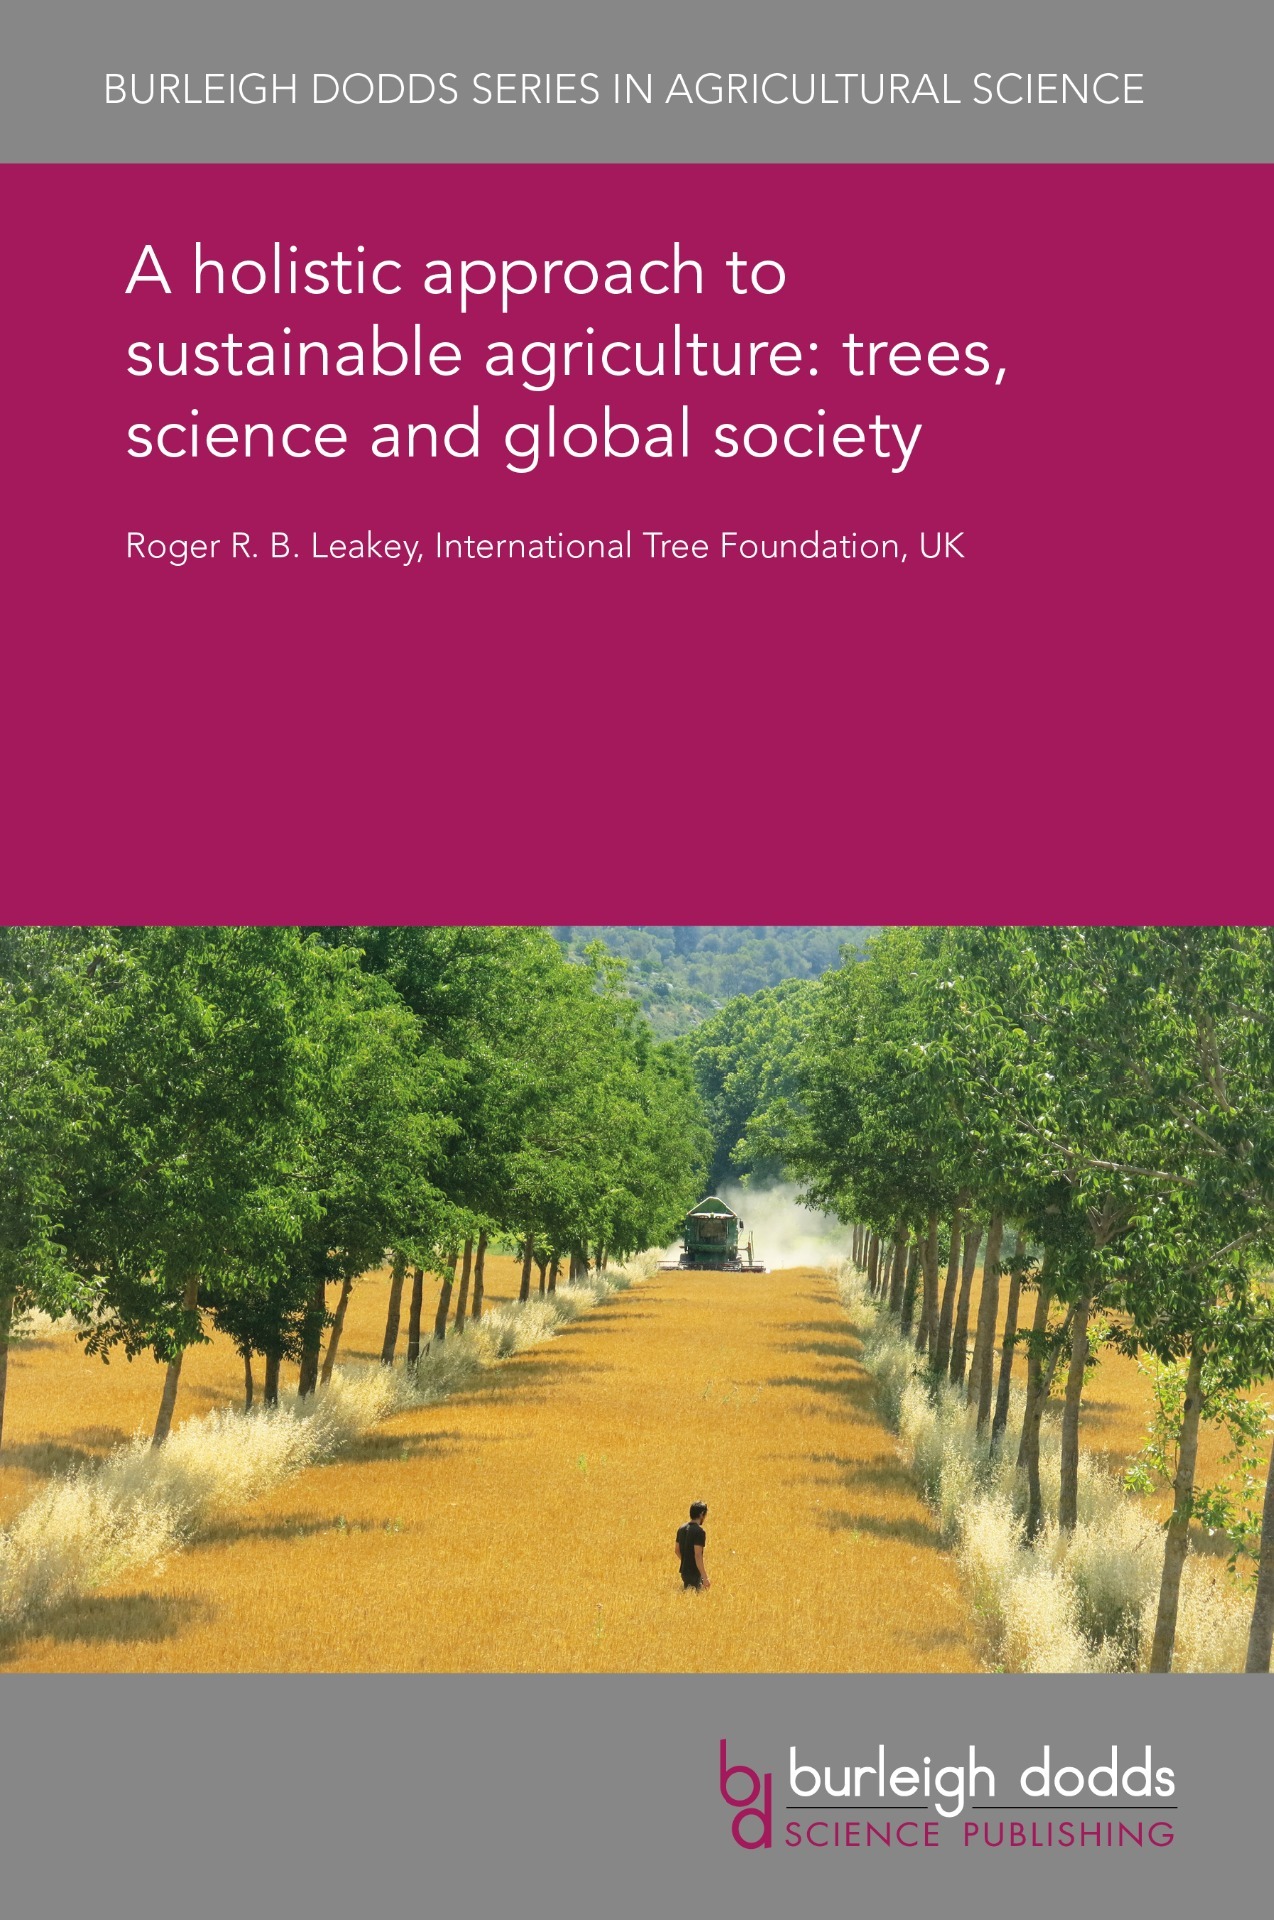 A holistic approach to sustainable agriculture: trees, science and global society